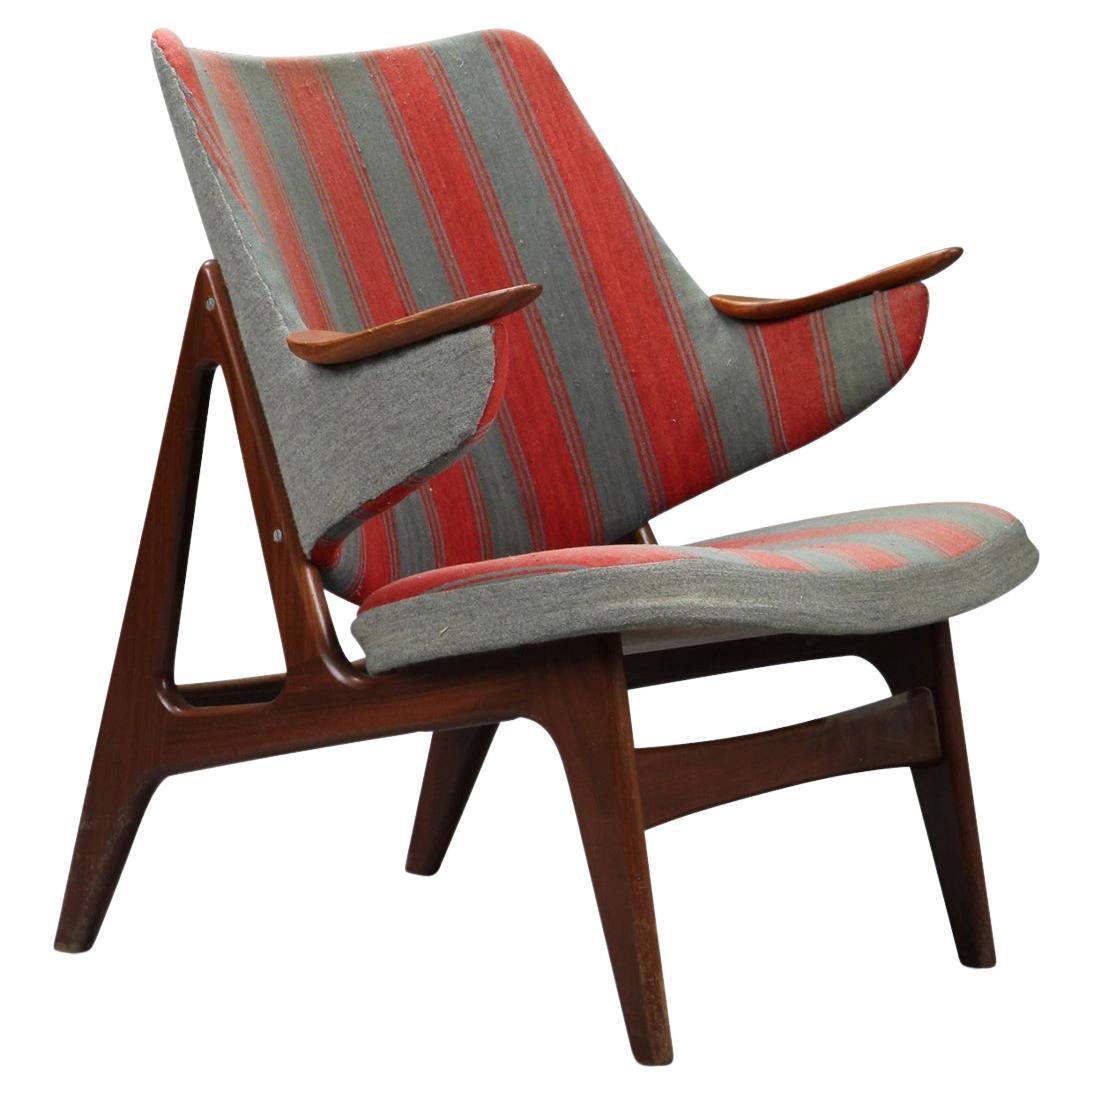 A Frame Lounge Chair in Teak by Carl Edward Matthes